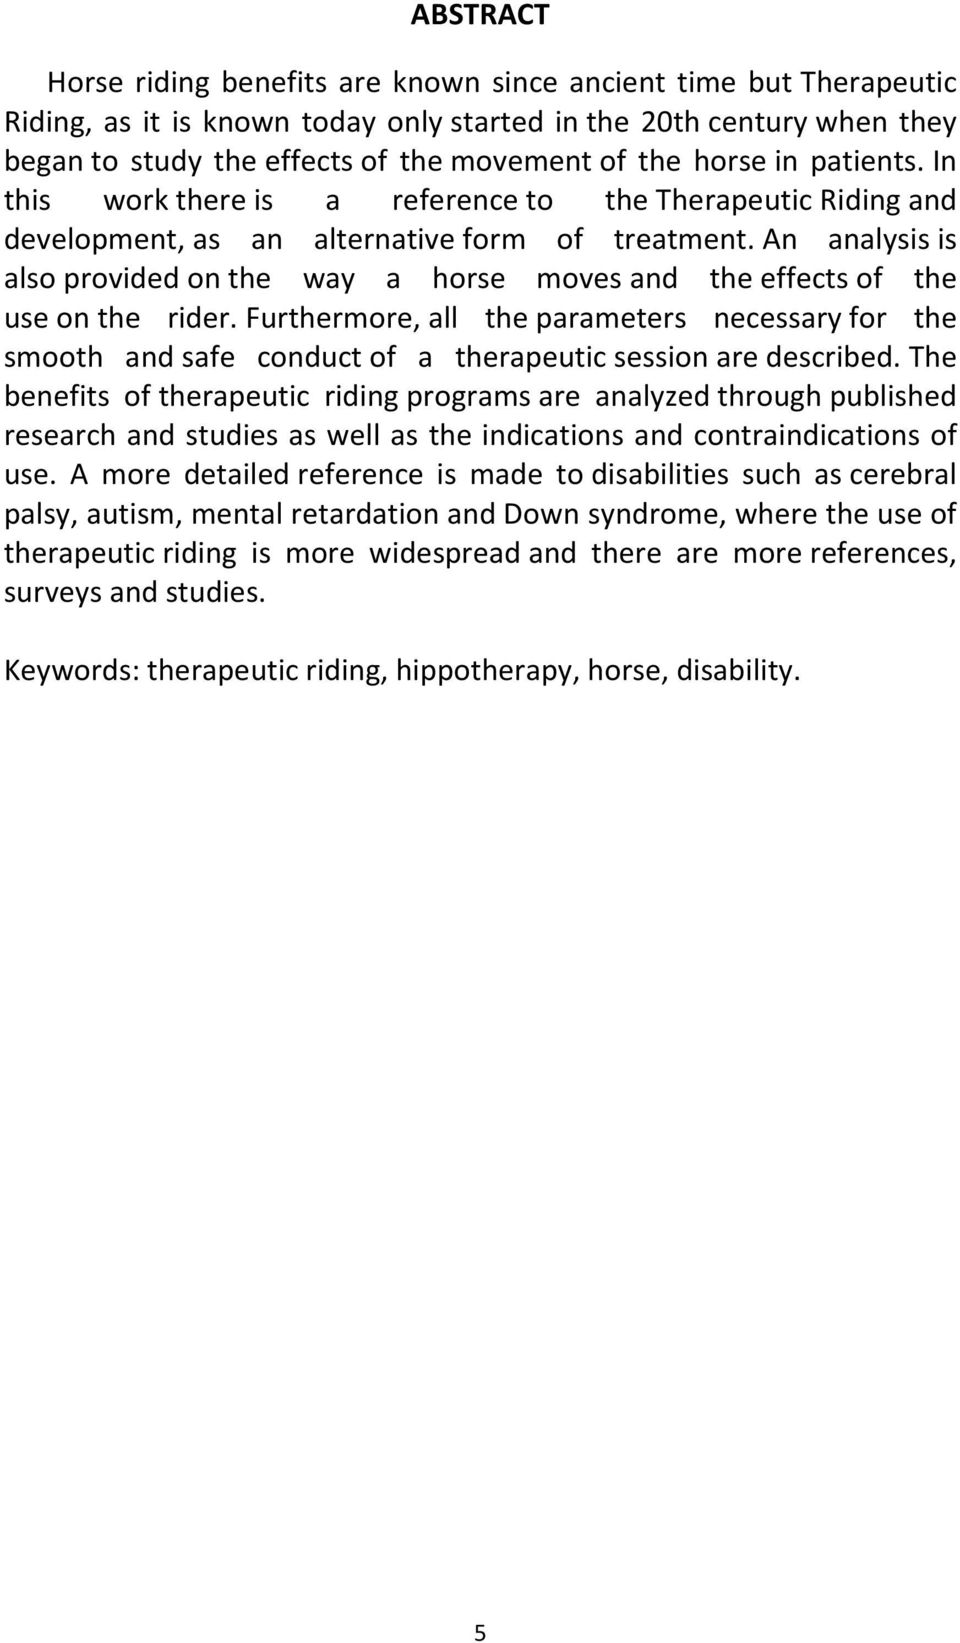 An analysis is also provided on the way a horse moves and the effects of the use on the rider.